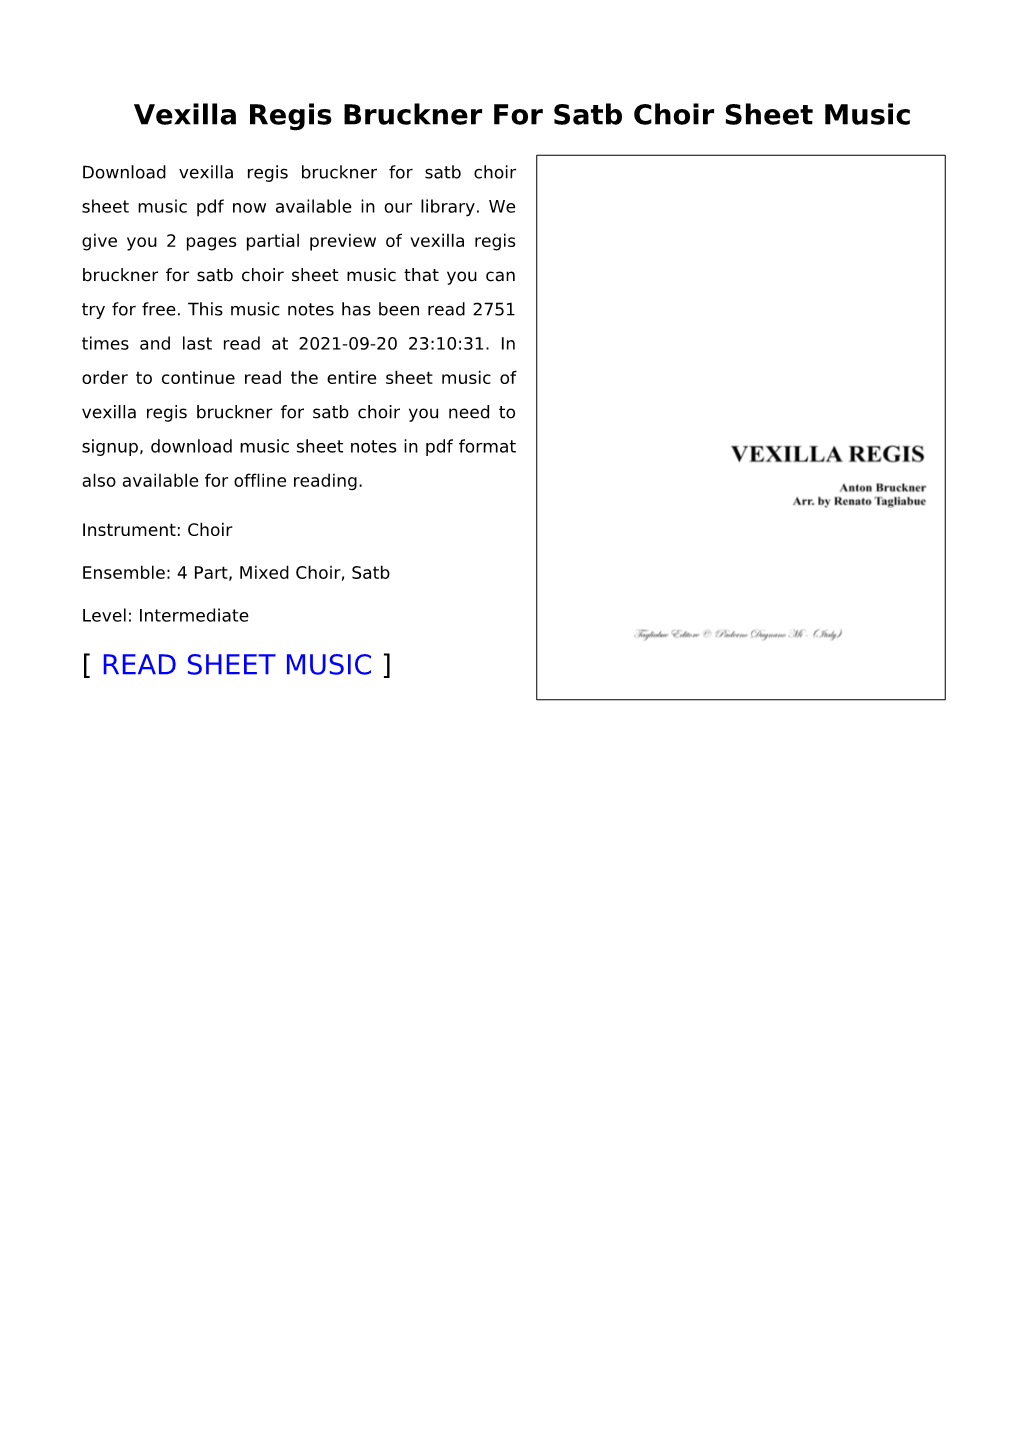 Sheet Music of Vexilla Regis Bruckner for Satb Choir You Need to Signup, Download Music Sheet Notes in Pdf Format Also Available for Offline Reading